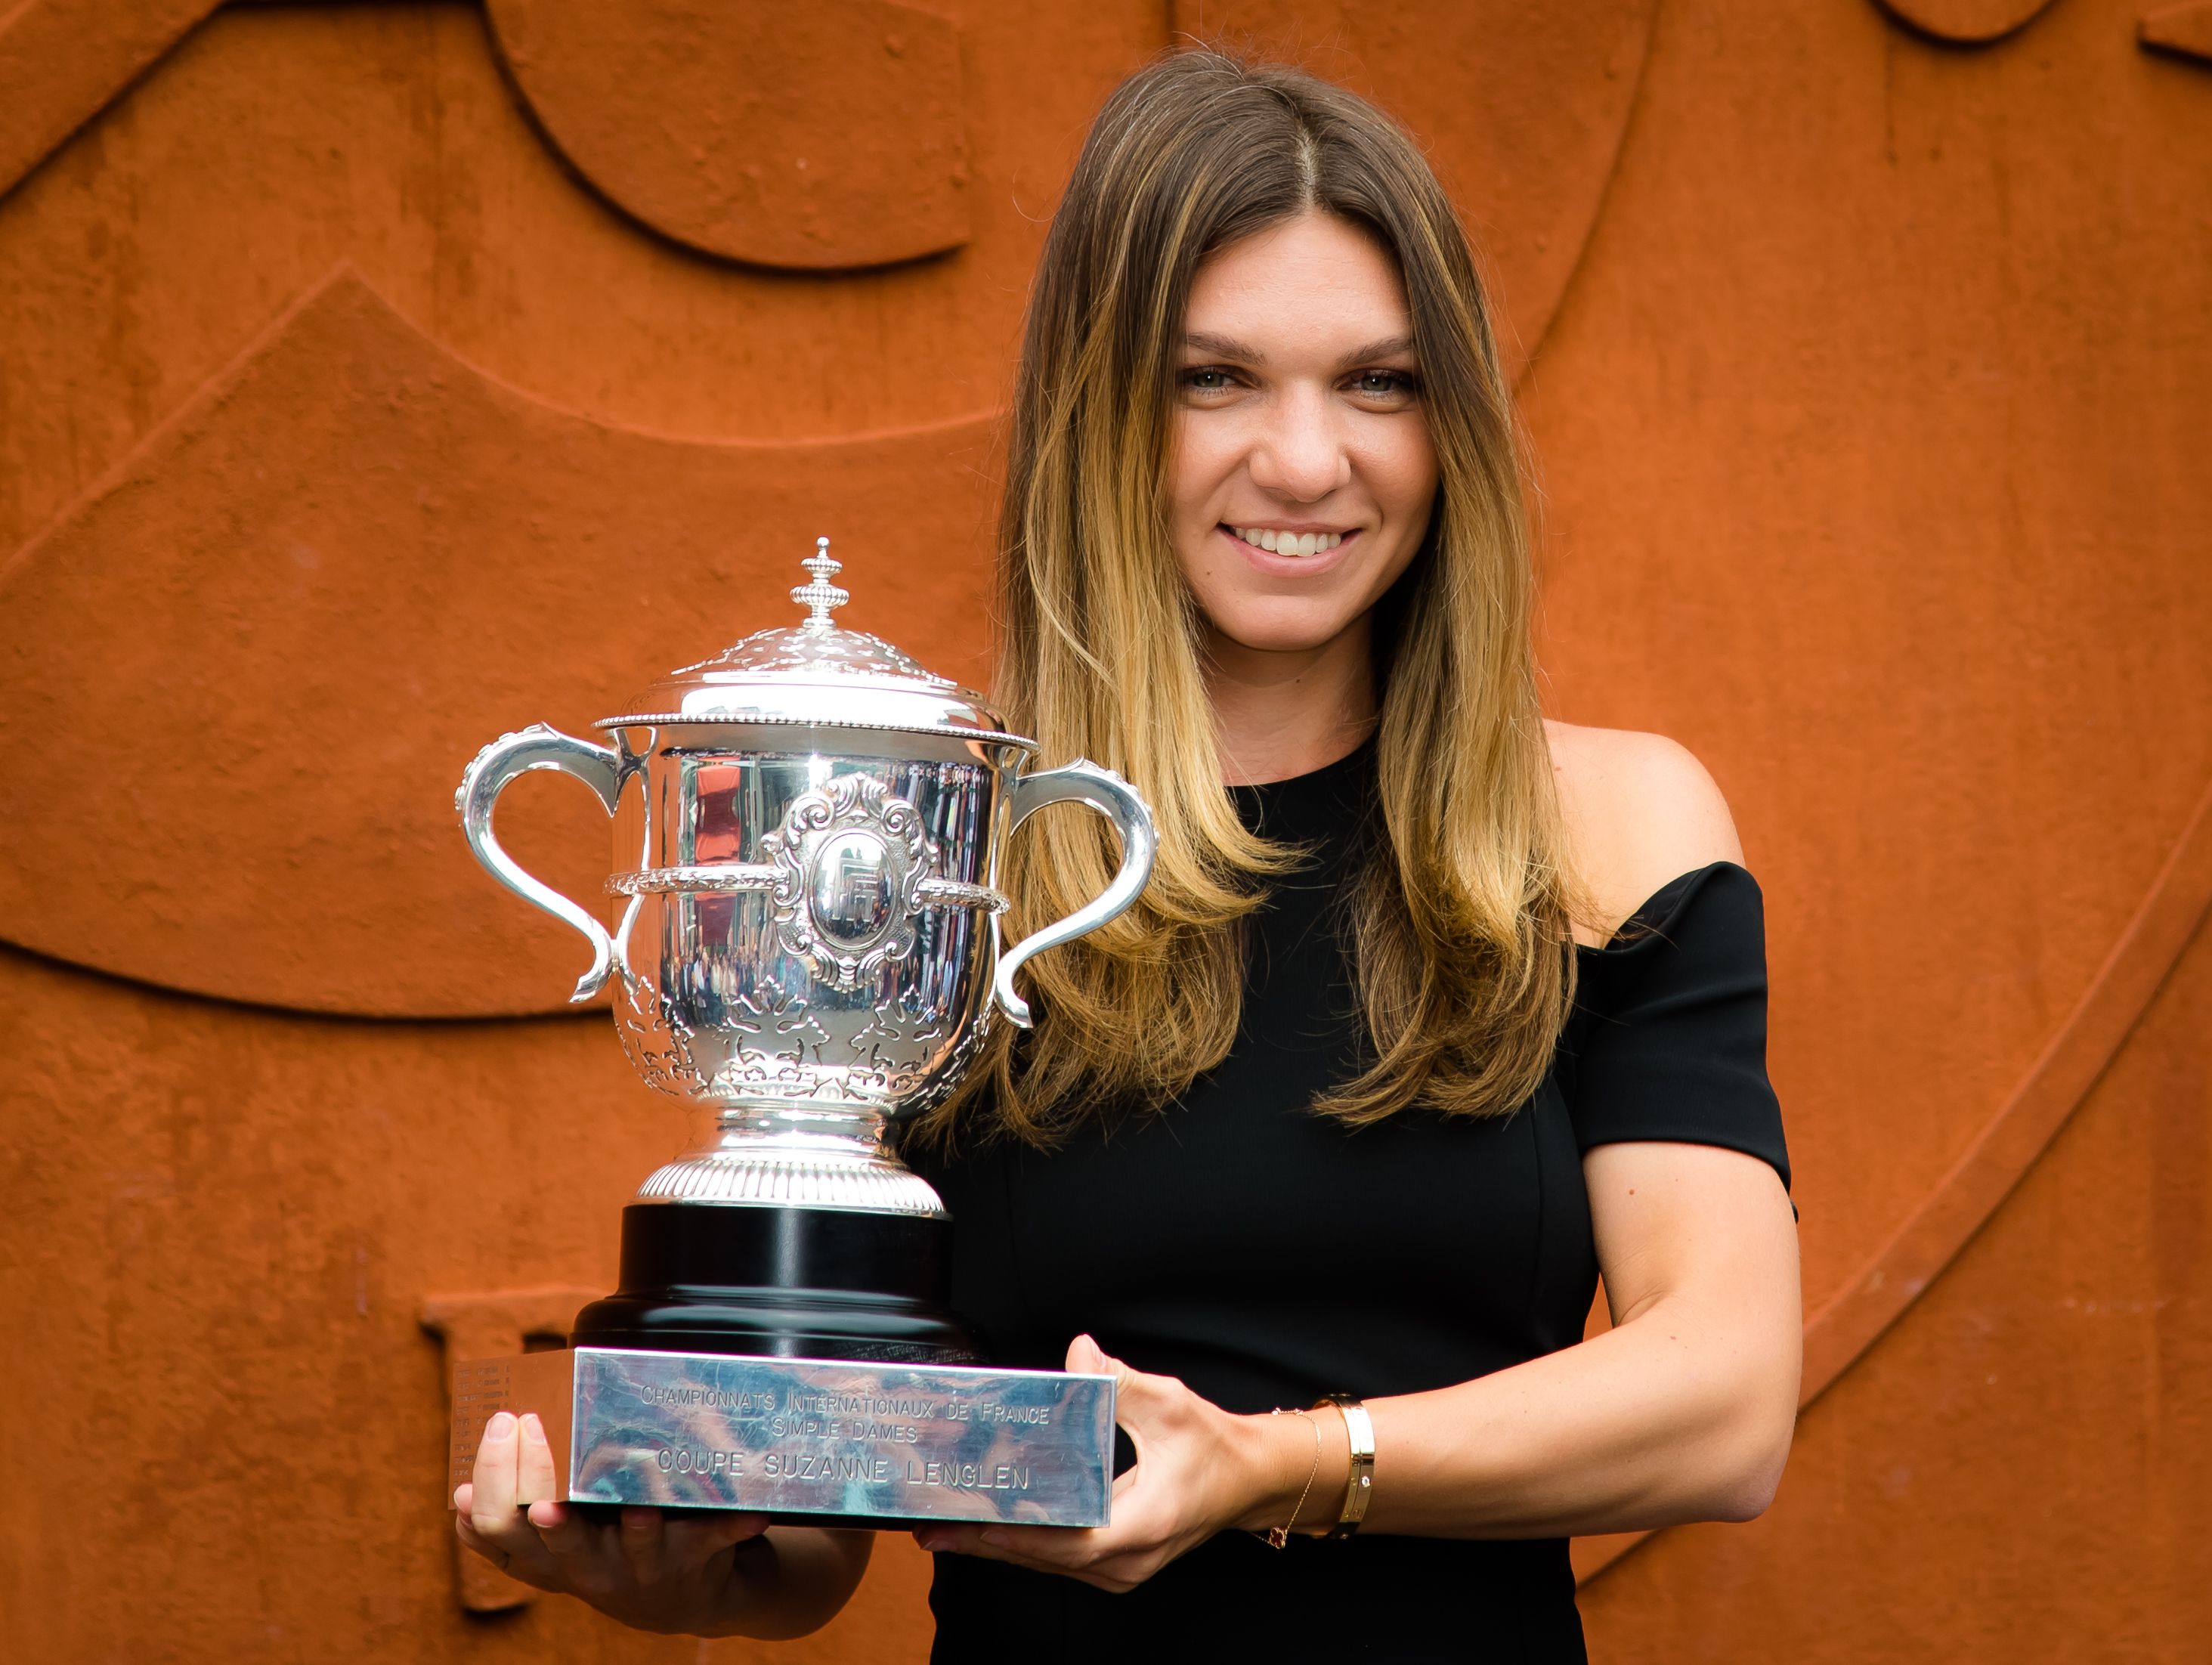 Rafael Nadal and Simona Halep win 2018 French Open Titles